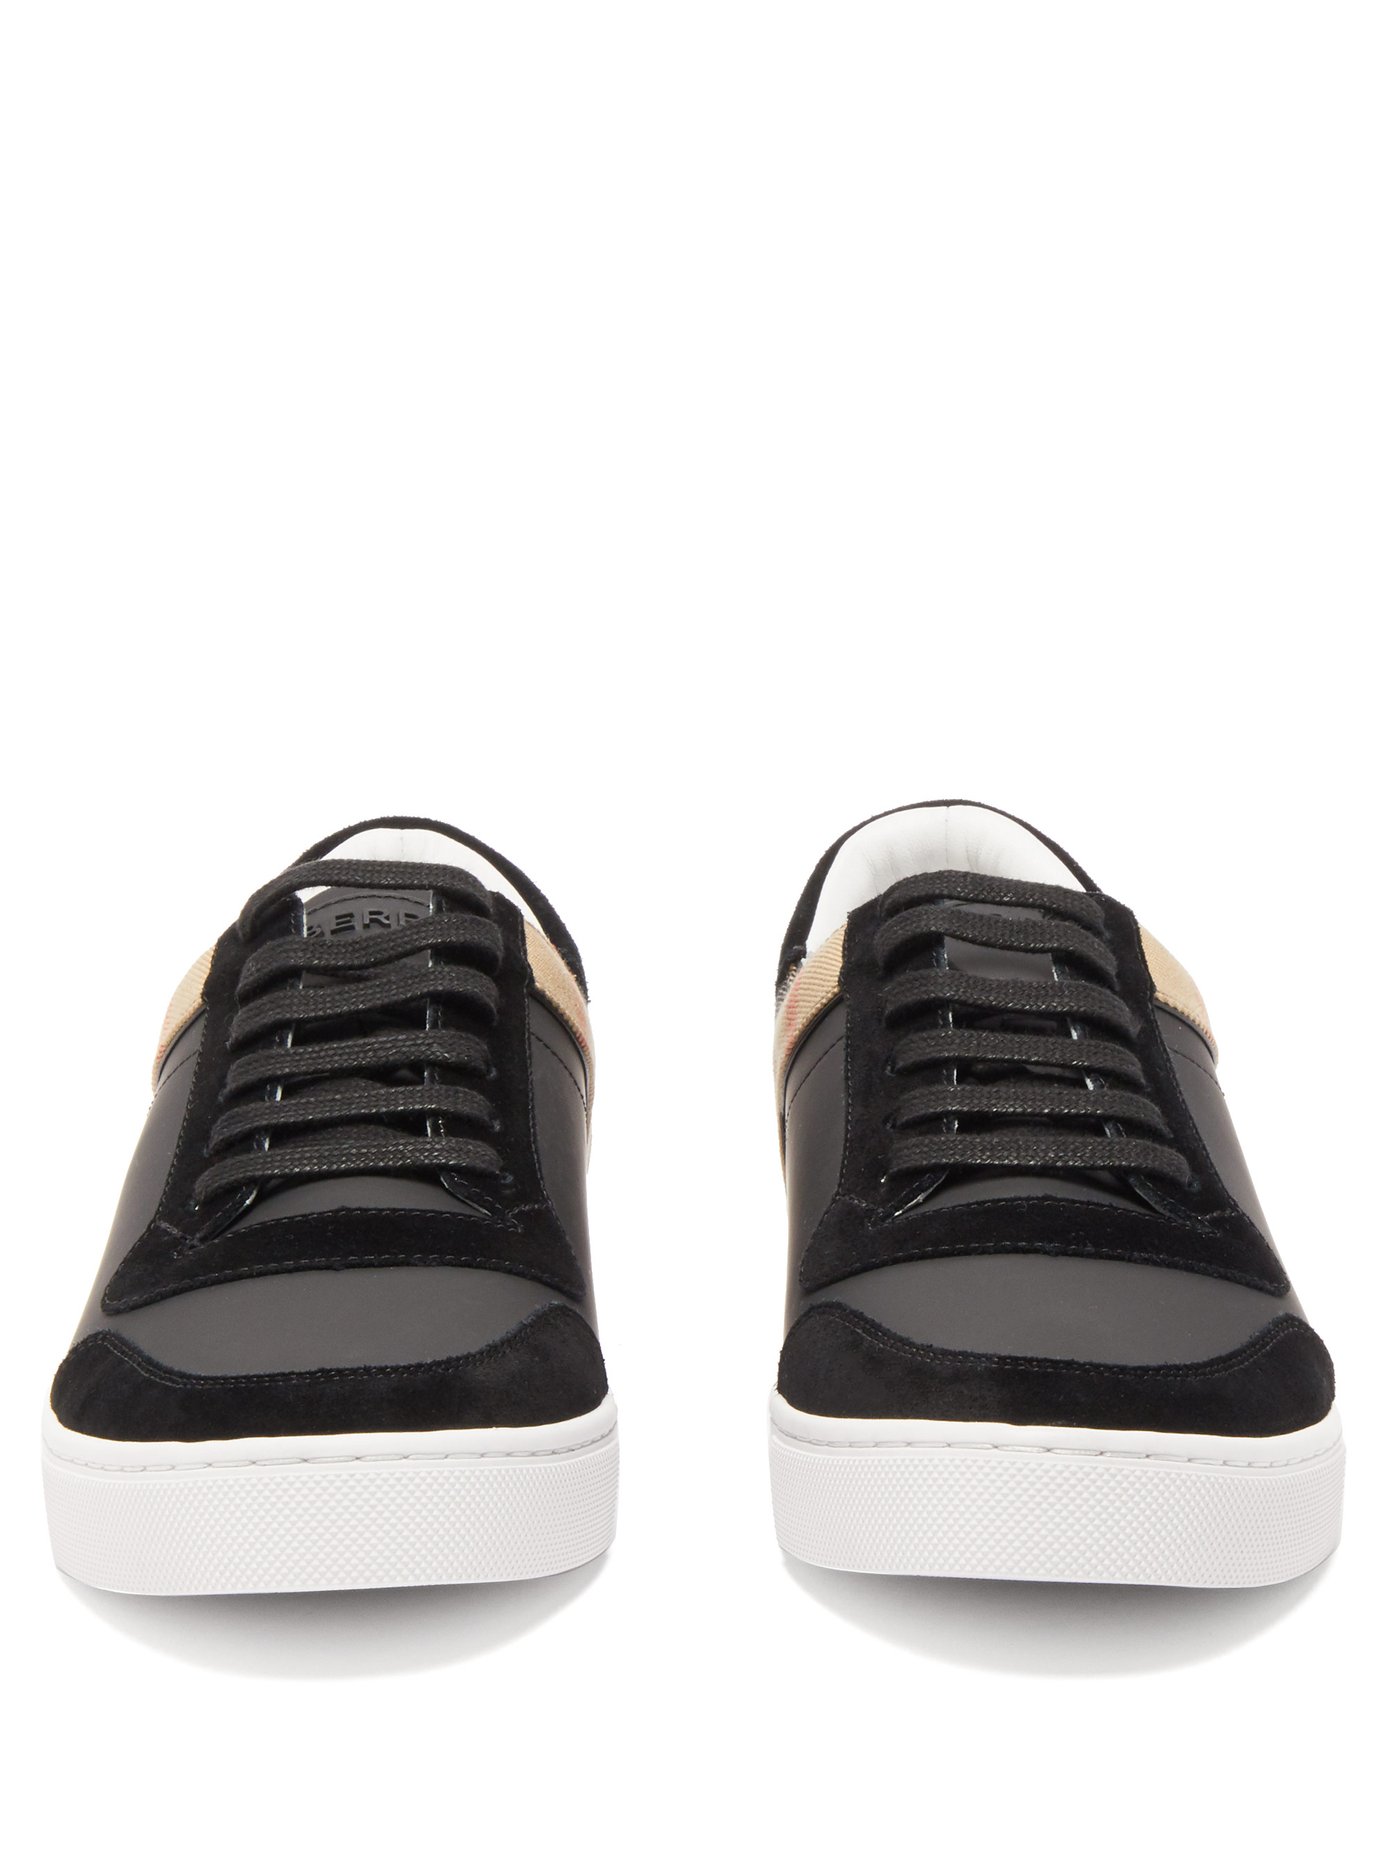 Burberry Men's Reeth Leather & House Check Low-top Sneakers, Black ...